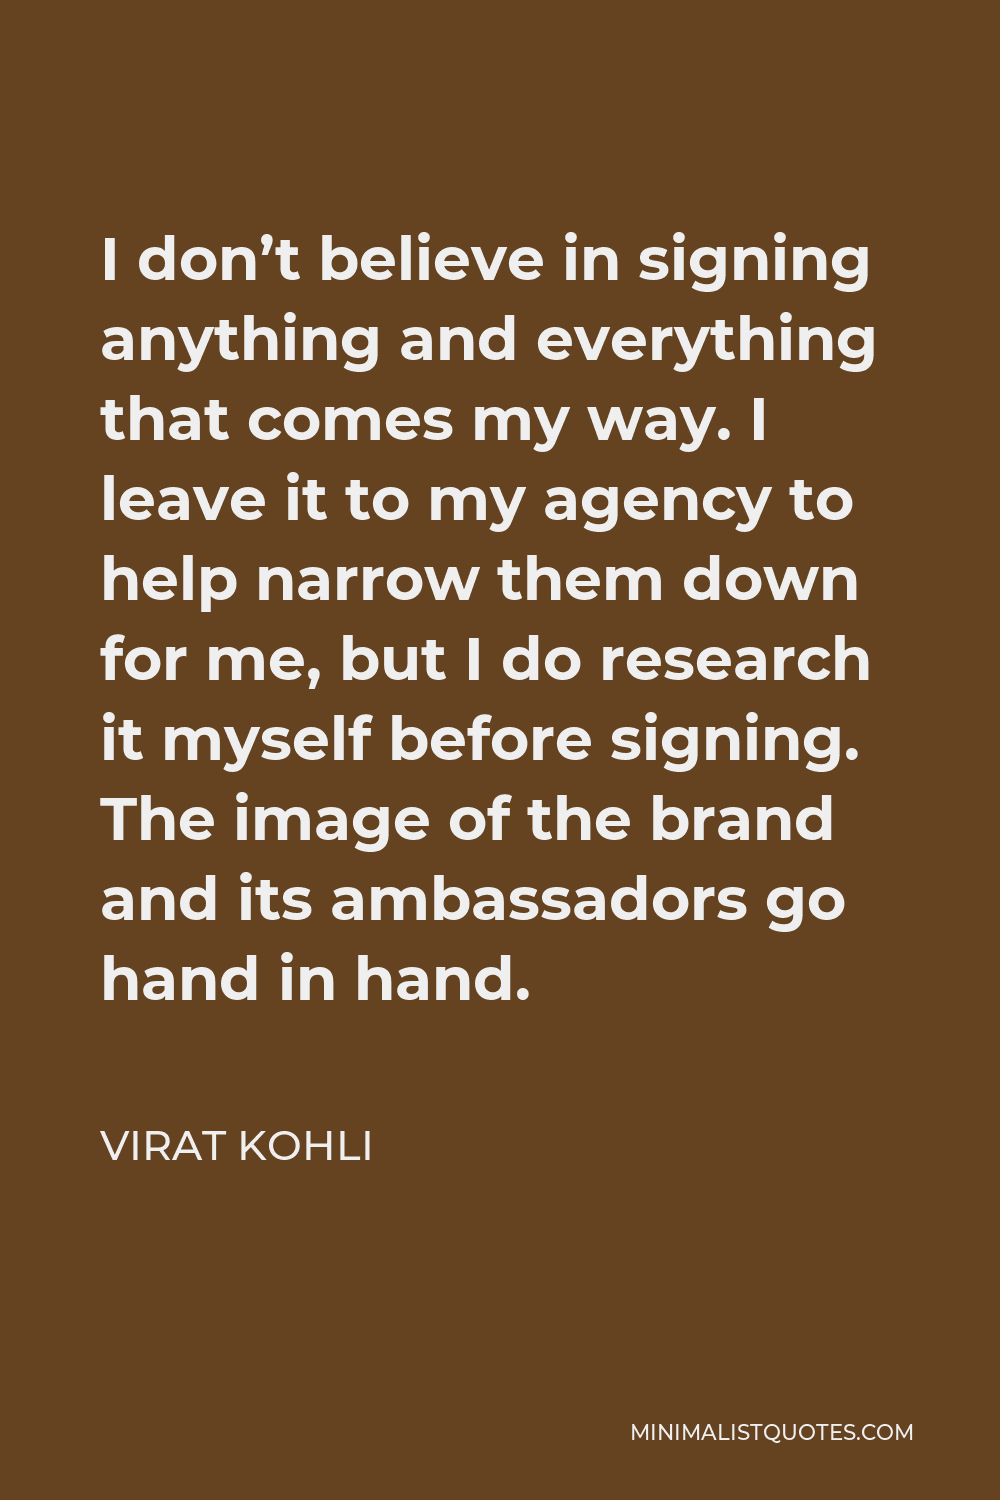 Virat Kohli Quote - I don’t believe in signing anything and everything that comes my way. I leave it to my agency to help narrow them down for me, but I do research it myself before signing. The image of the brand and its ambassadors go hand in hand.